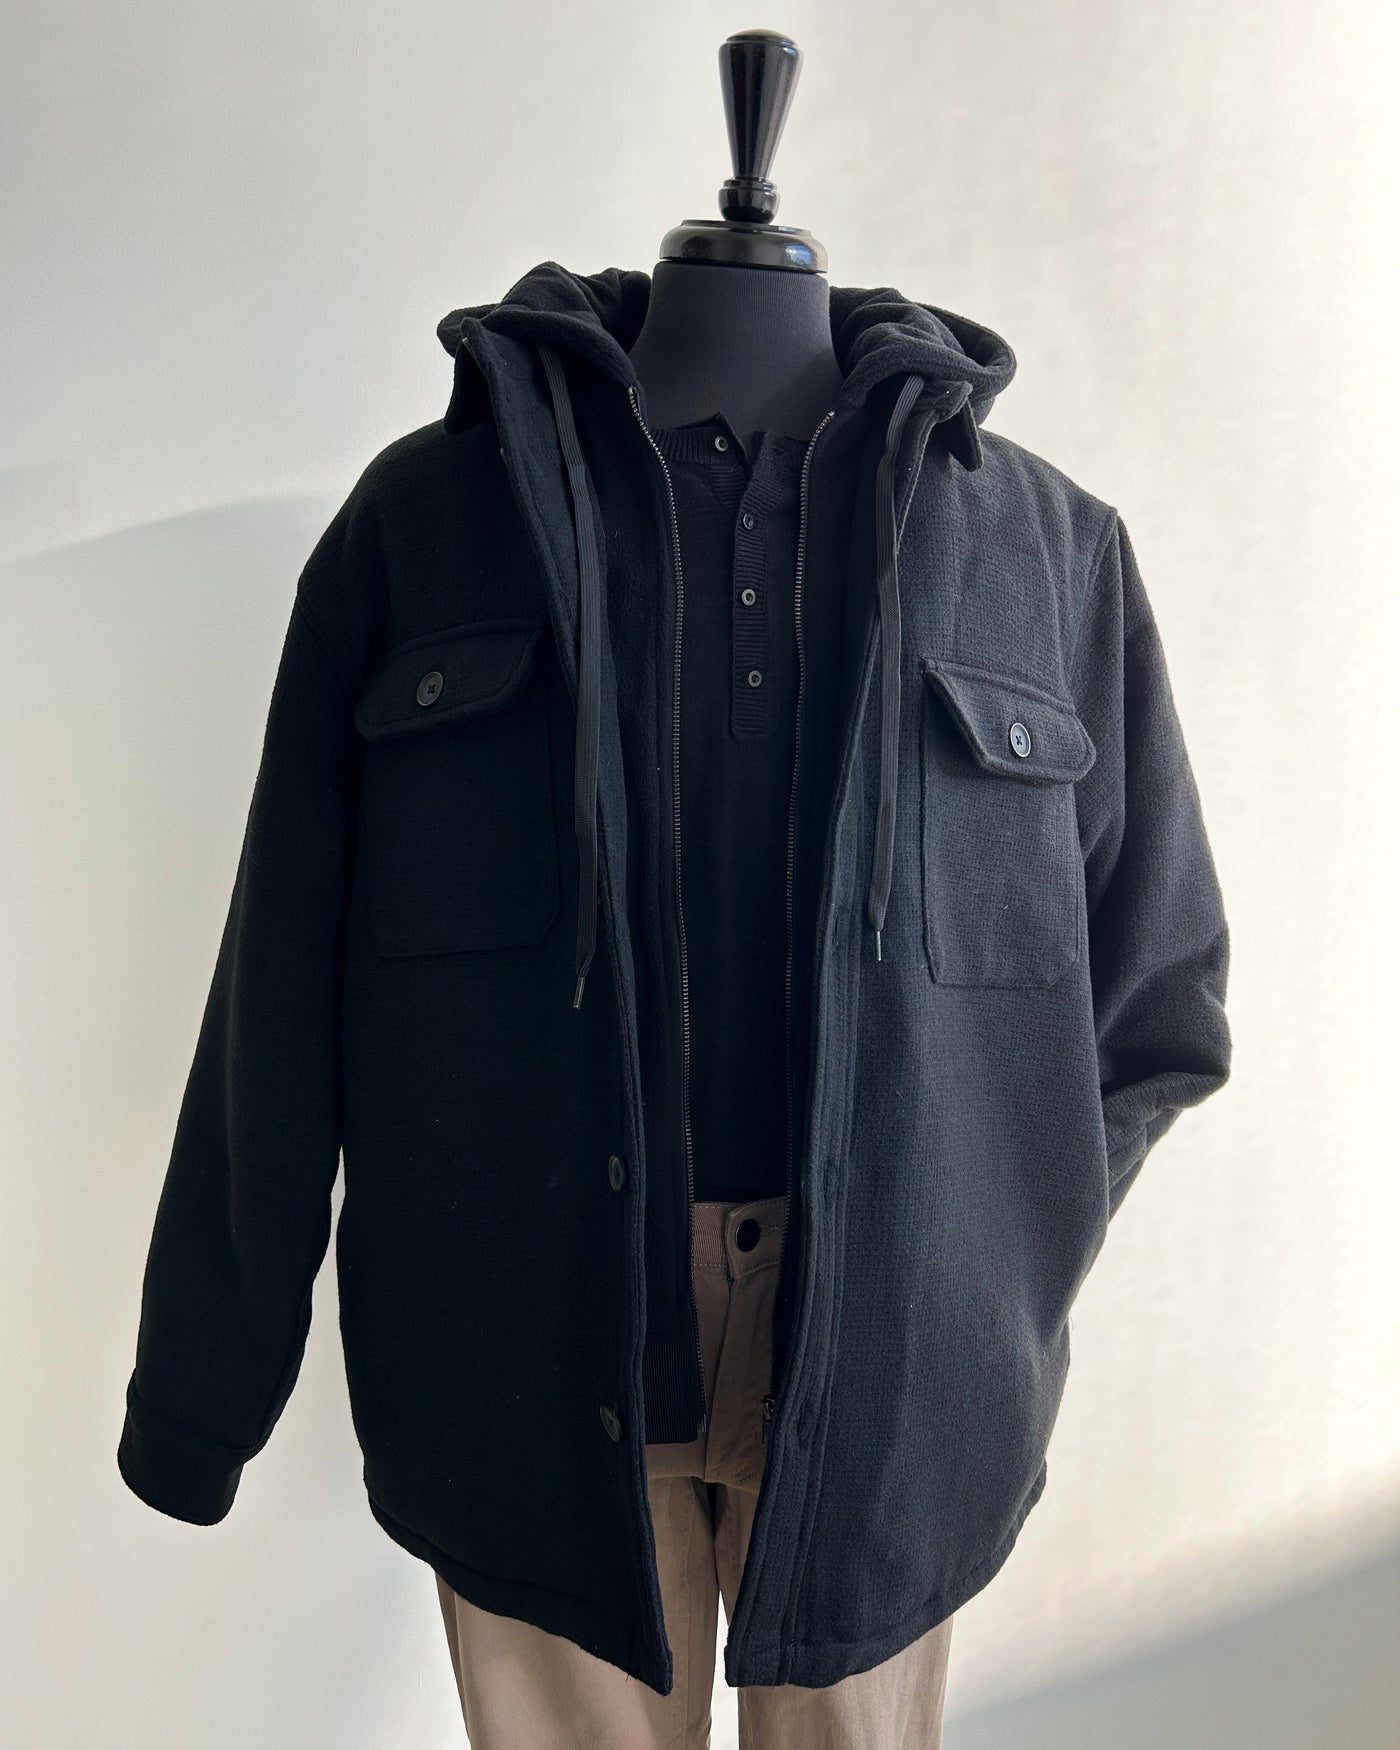 Asher Woven Jacket